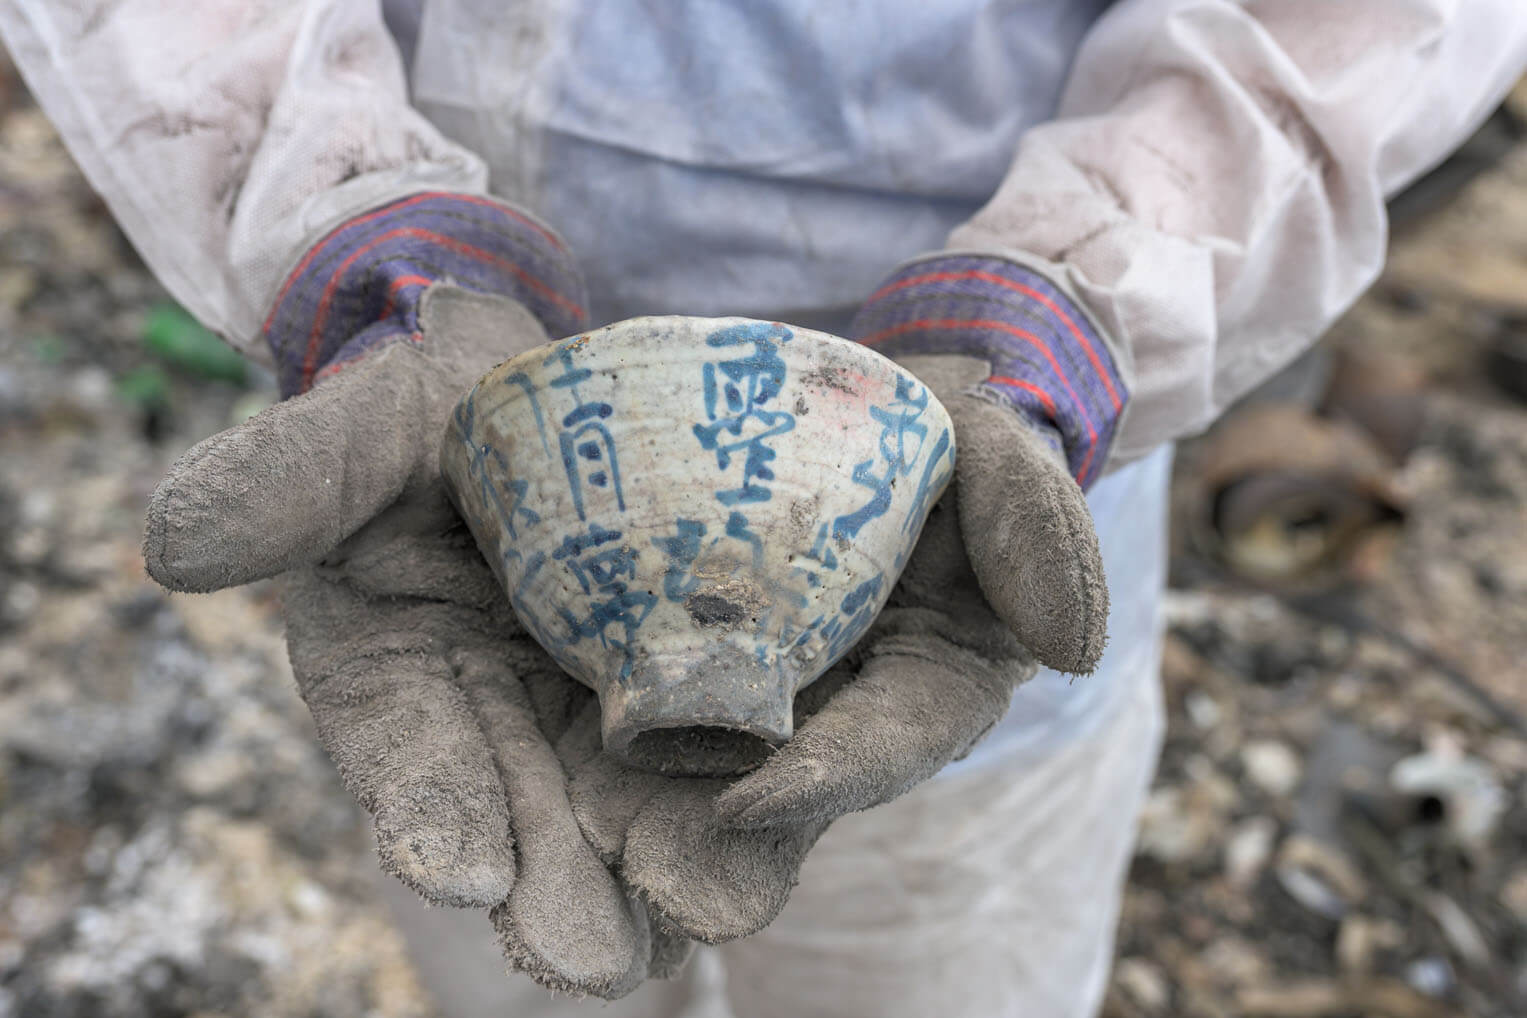 A soot-covered Samaritan's Purse volunteer holds an ornate ceramic cup discovered amid the ashes of a home.